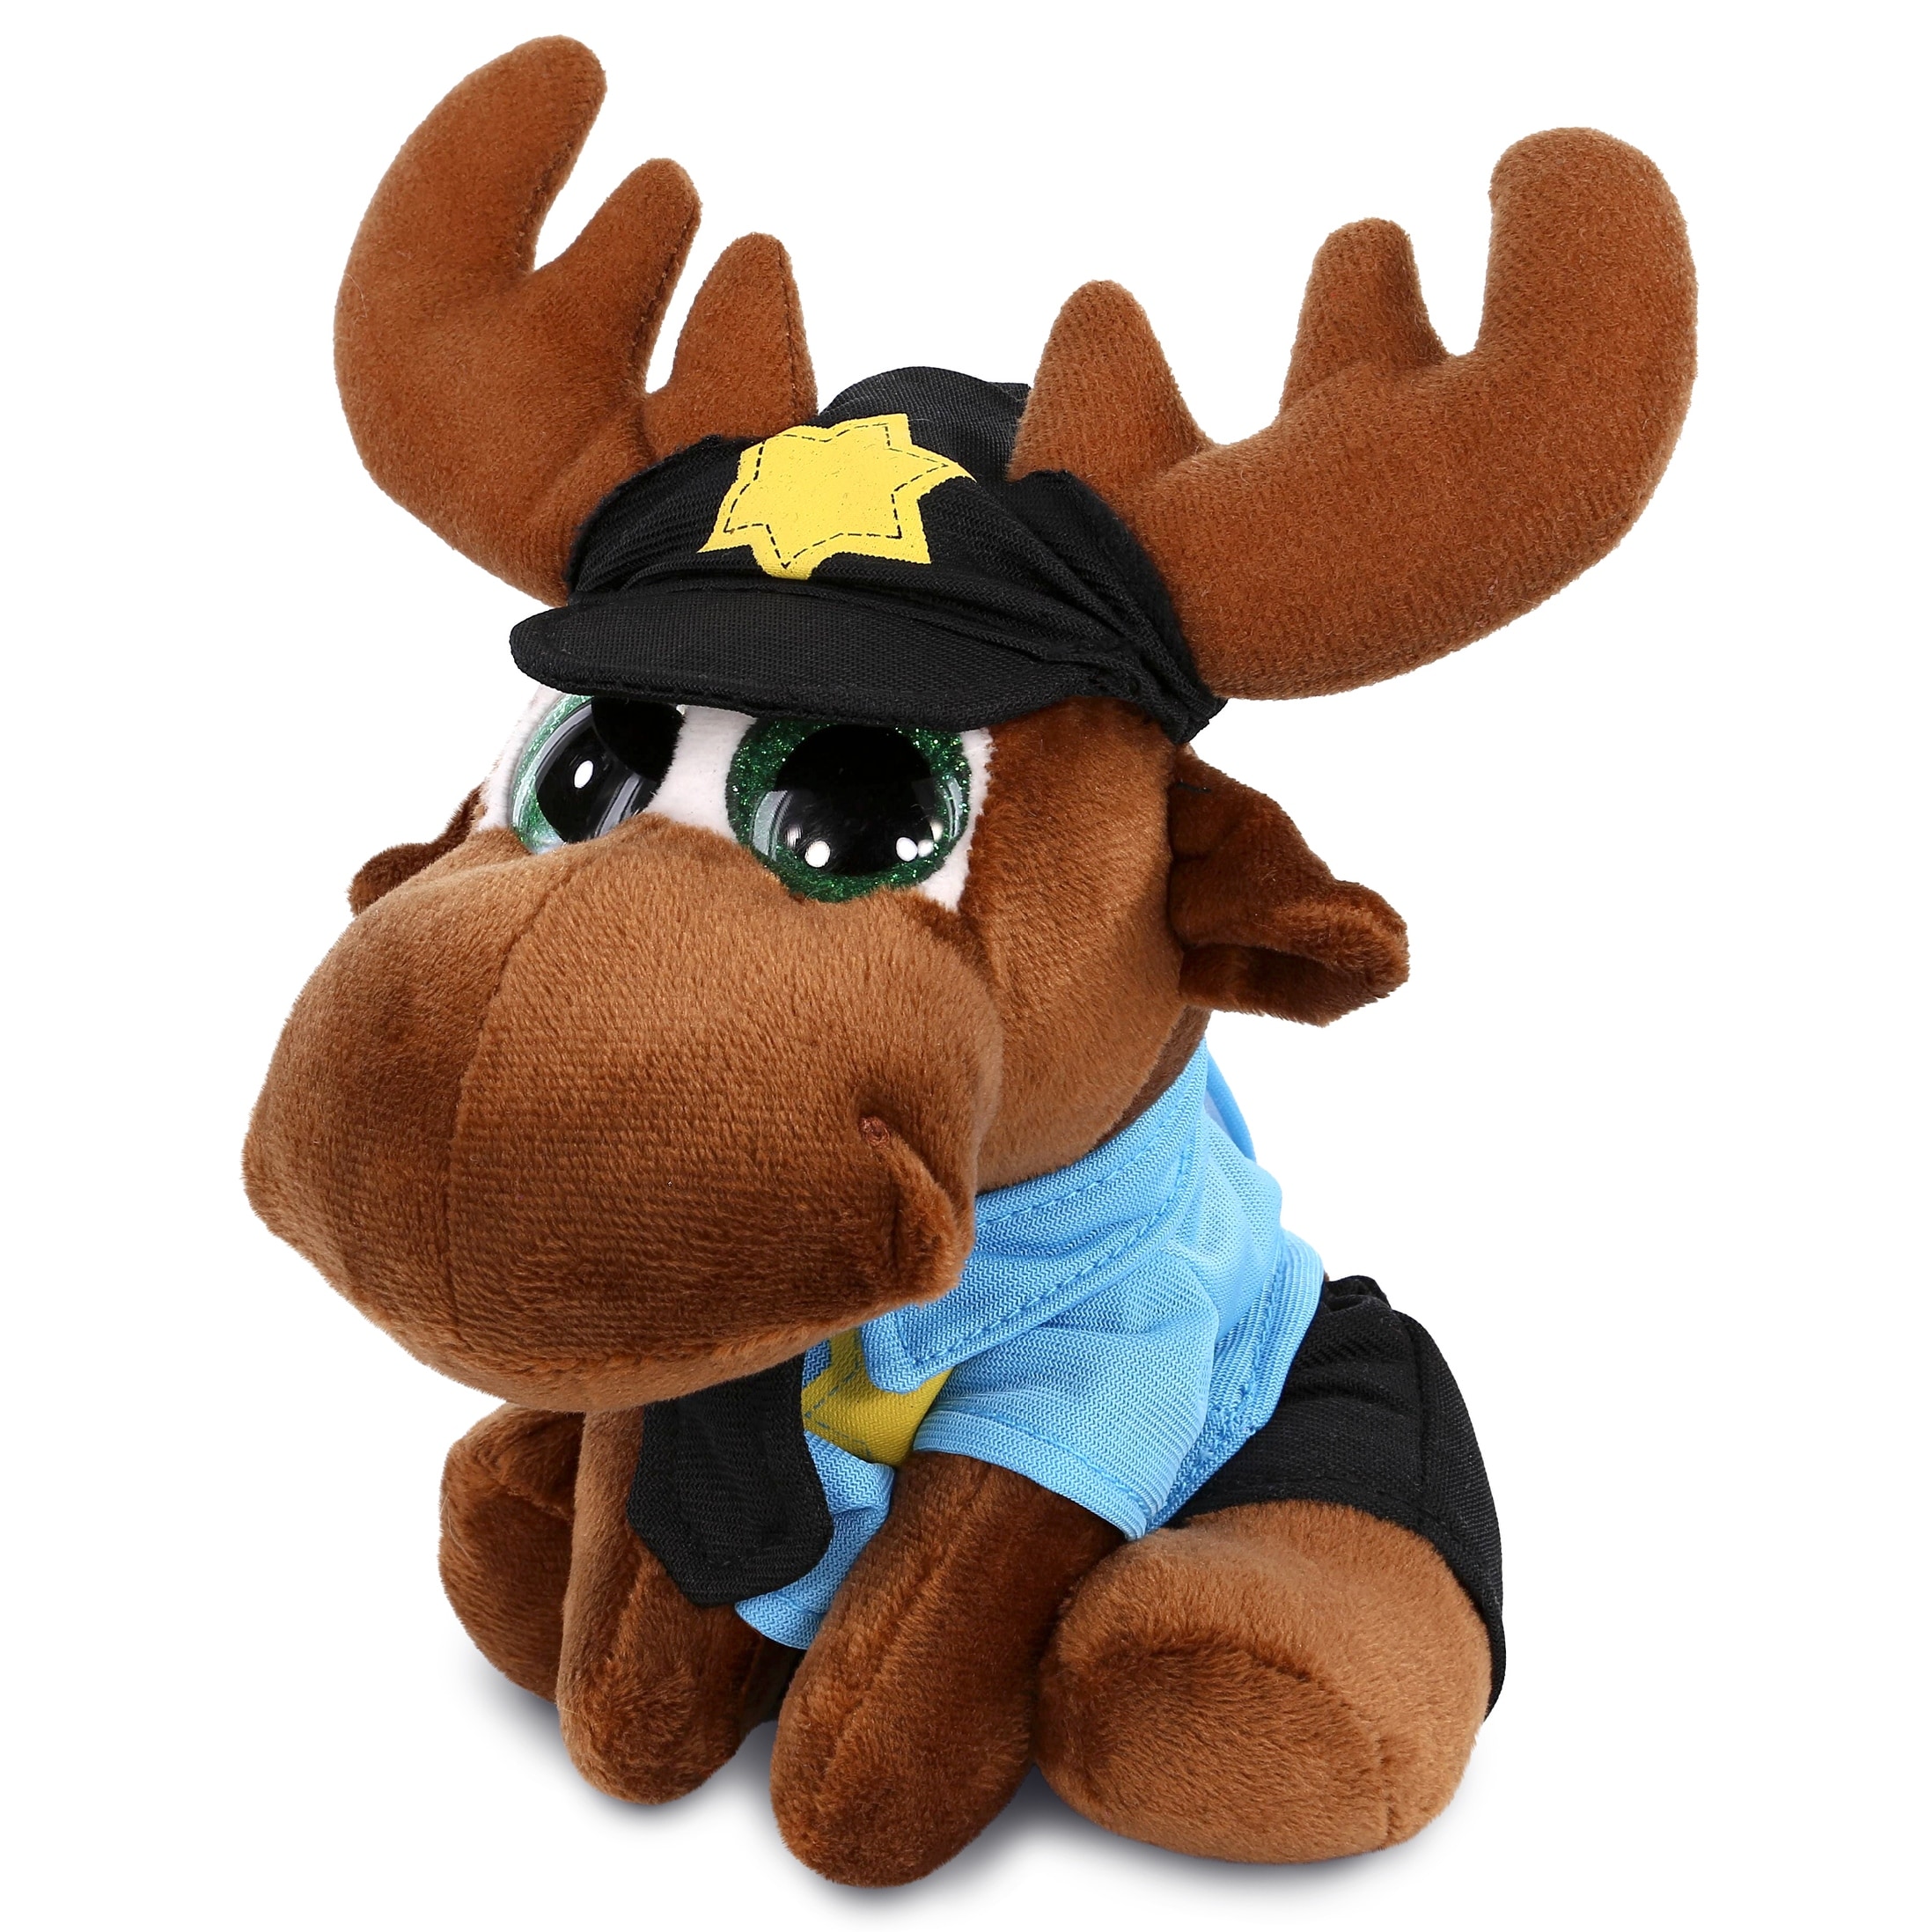 DolliBu Small Moose with Sparkle Eyes Police Officer Plush Toy - 6 inches